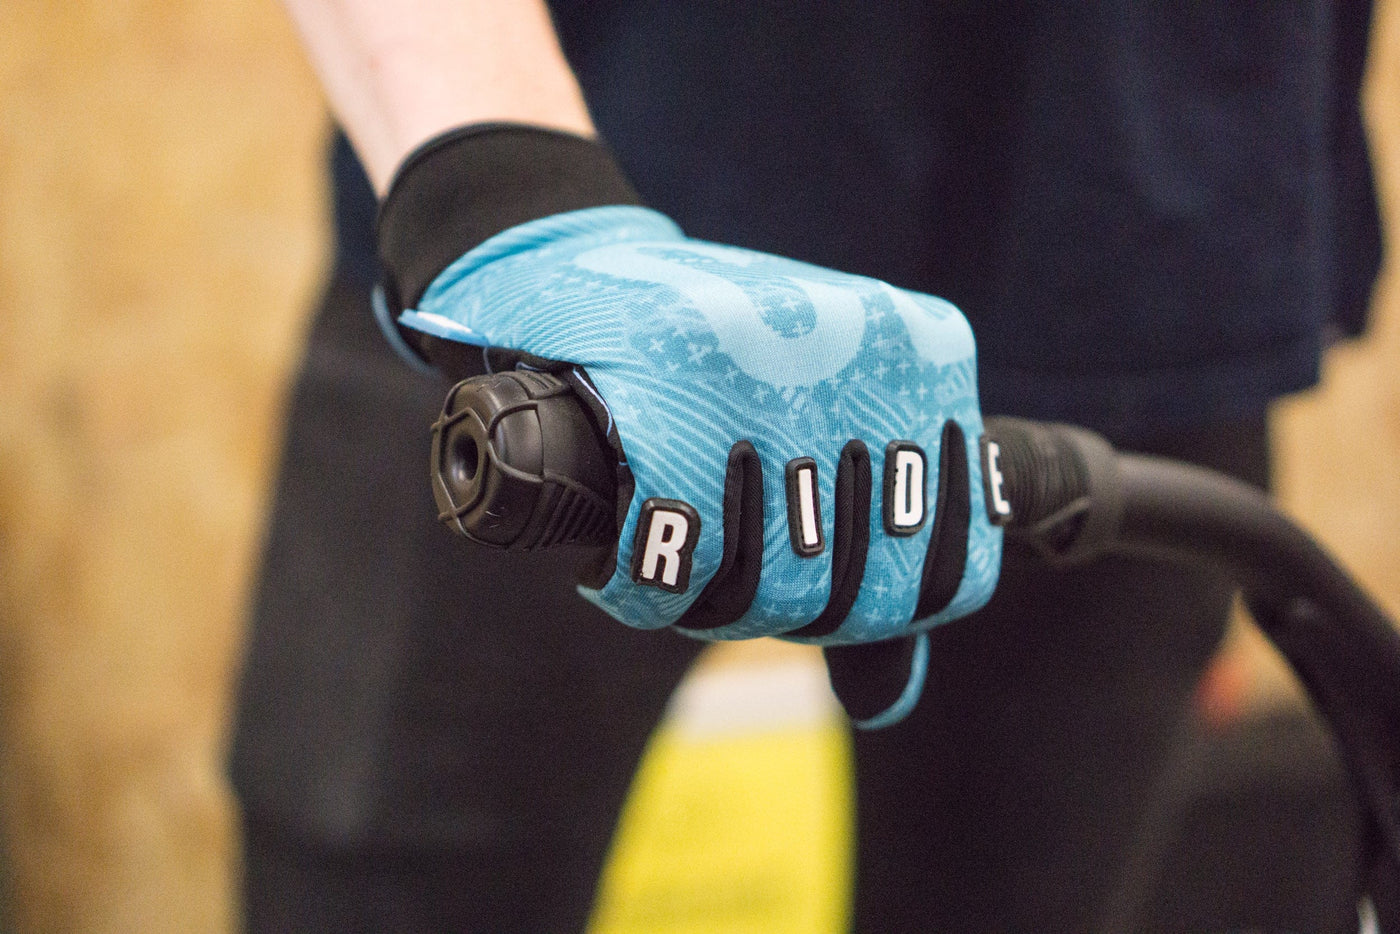 CORE Protection BMX Gloves Teal I Bike Gloves Gripping